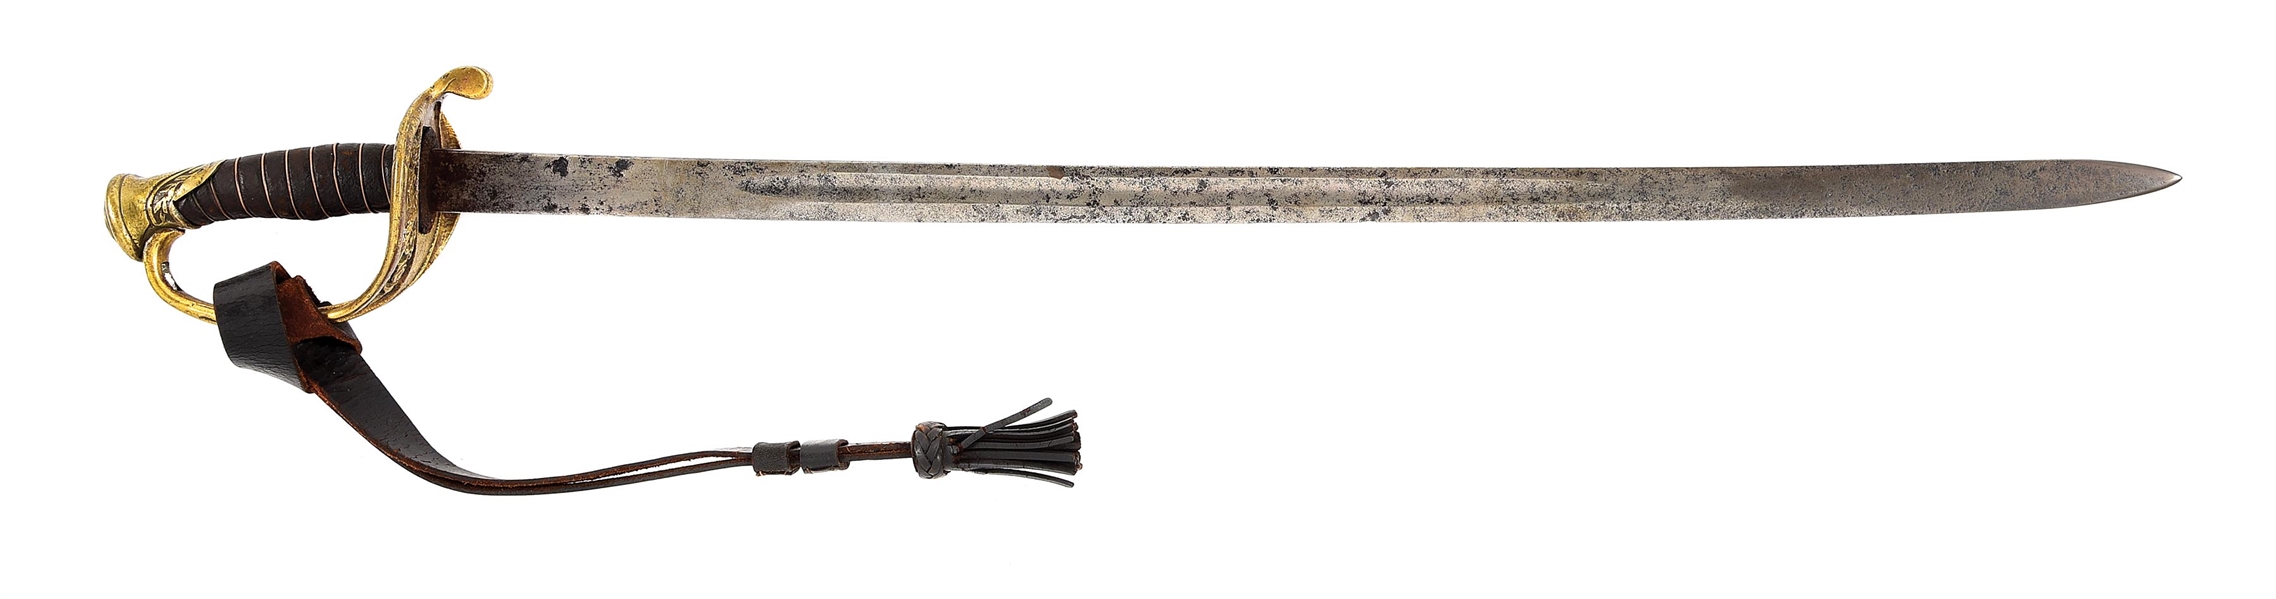 BOYLE & GAMBLE OFFICERS SWORD OF CAPTAIN WILLIAM INDEPENDENCE RASIN, COMPANY E, 1ST MARYLAND, CSA.